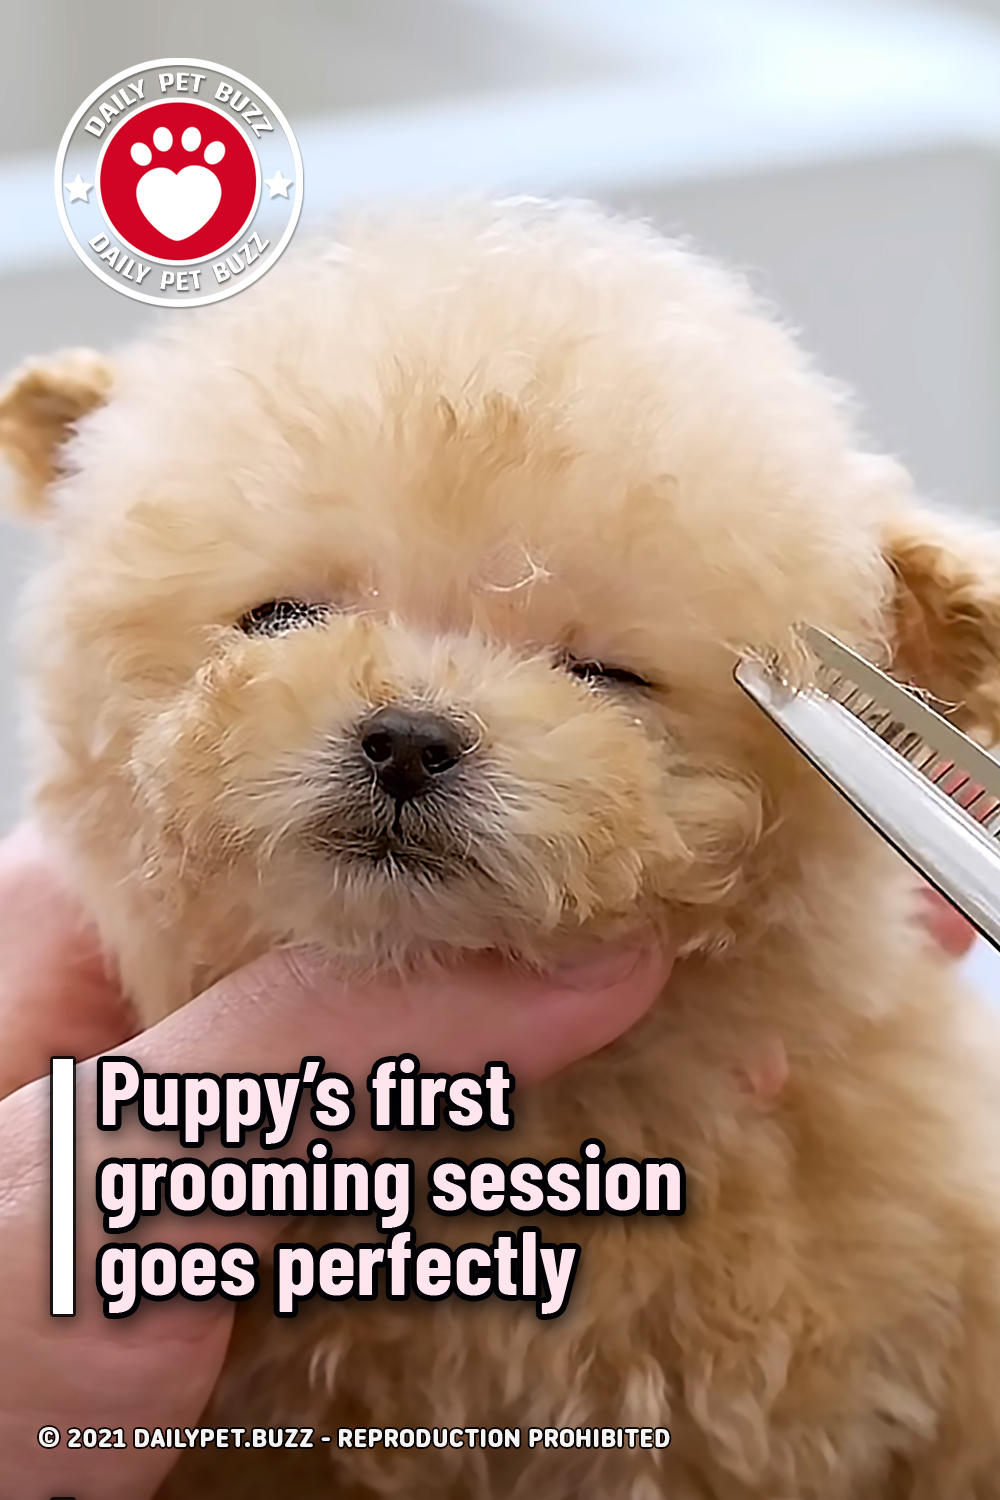 Puppy’s first grooming session goes perfectly